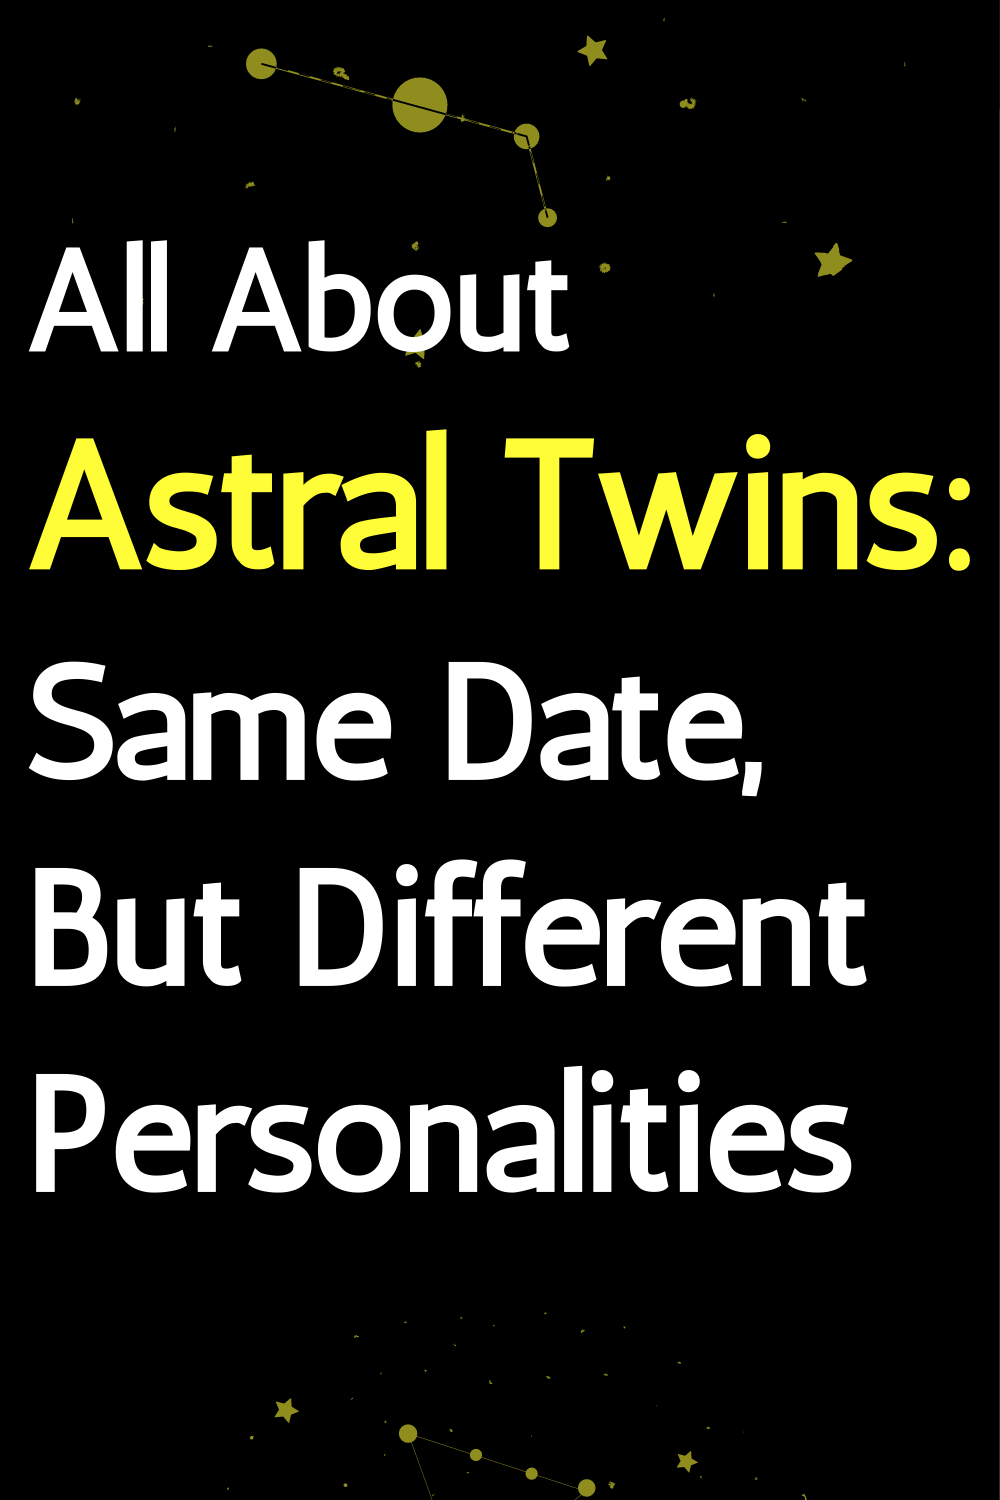 All About Astral Twins: Same Date, But Different Personalities